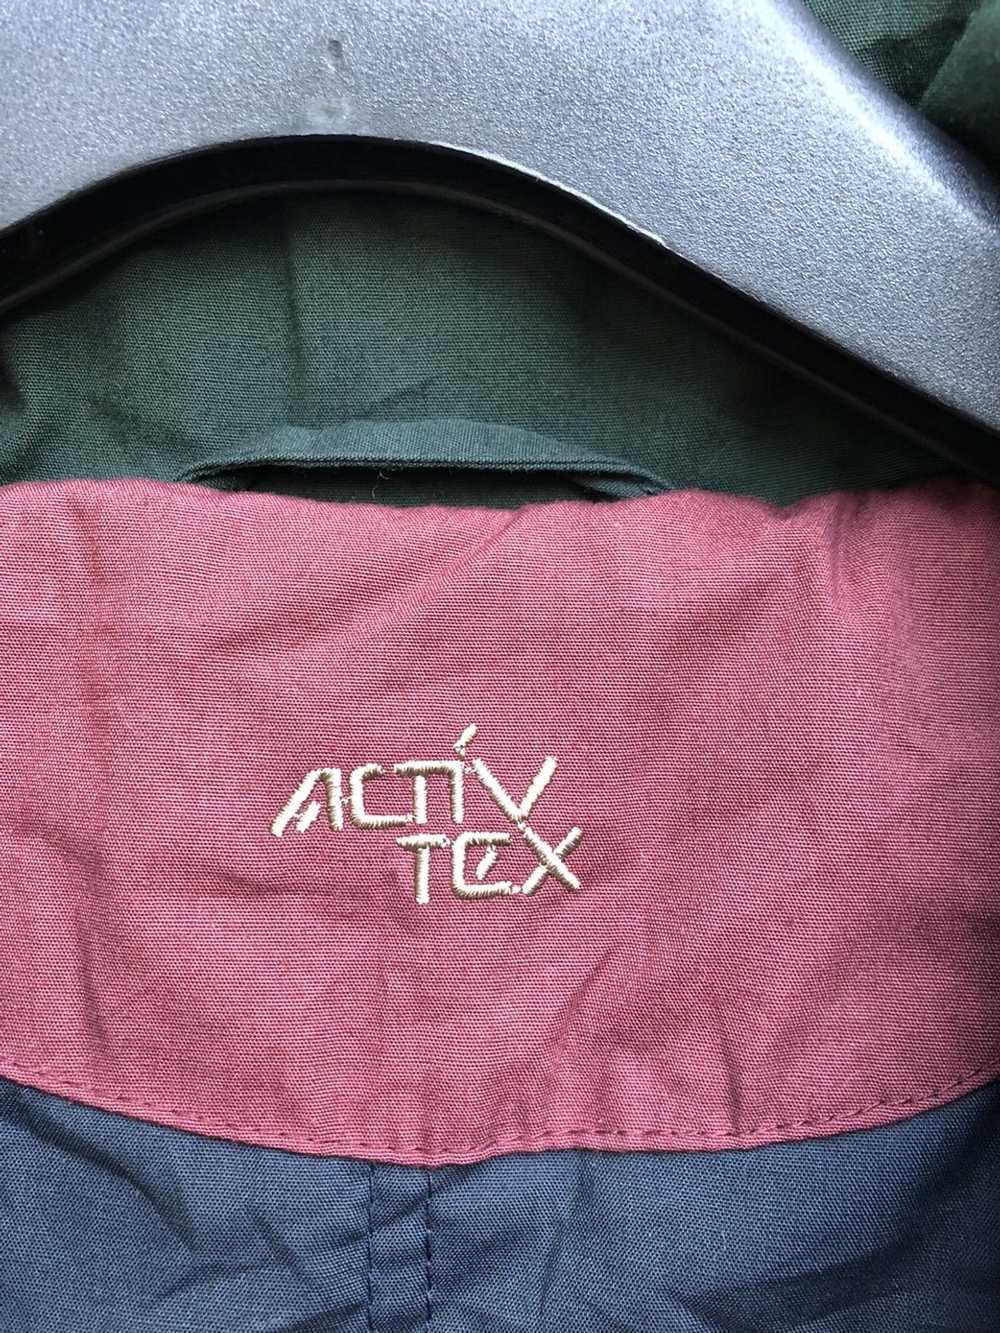 Brand × German × Outdoor Style Go Out! Activ Tex … - image 12